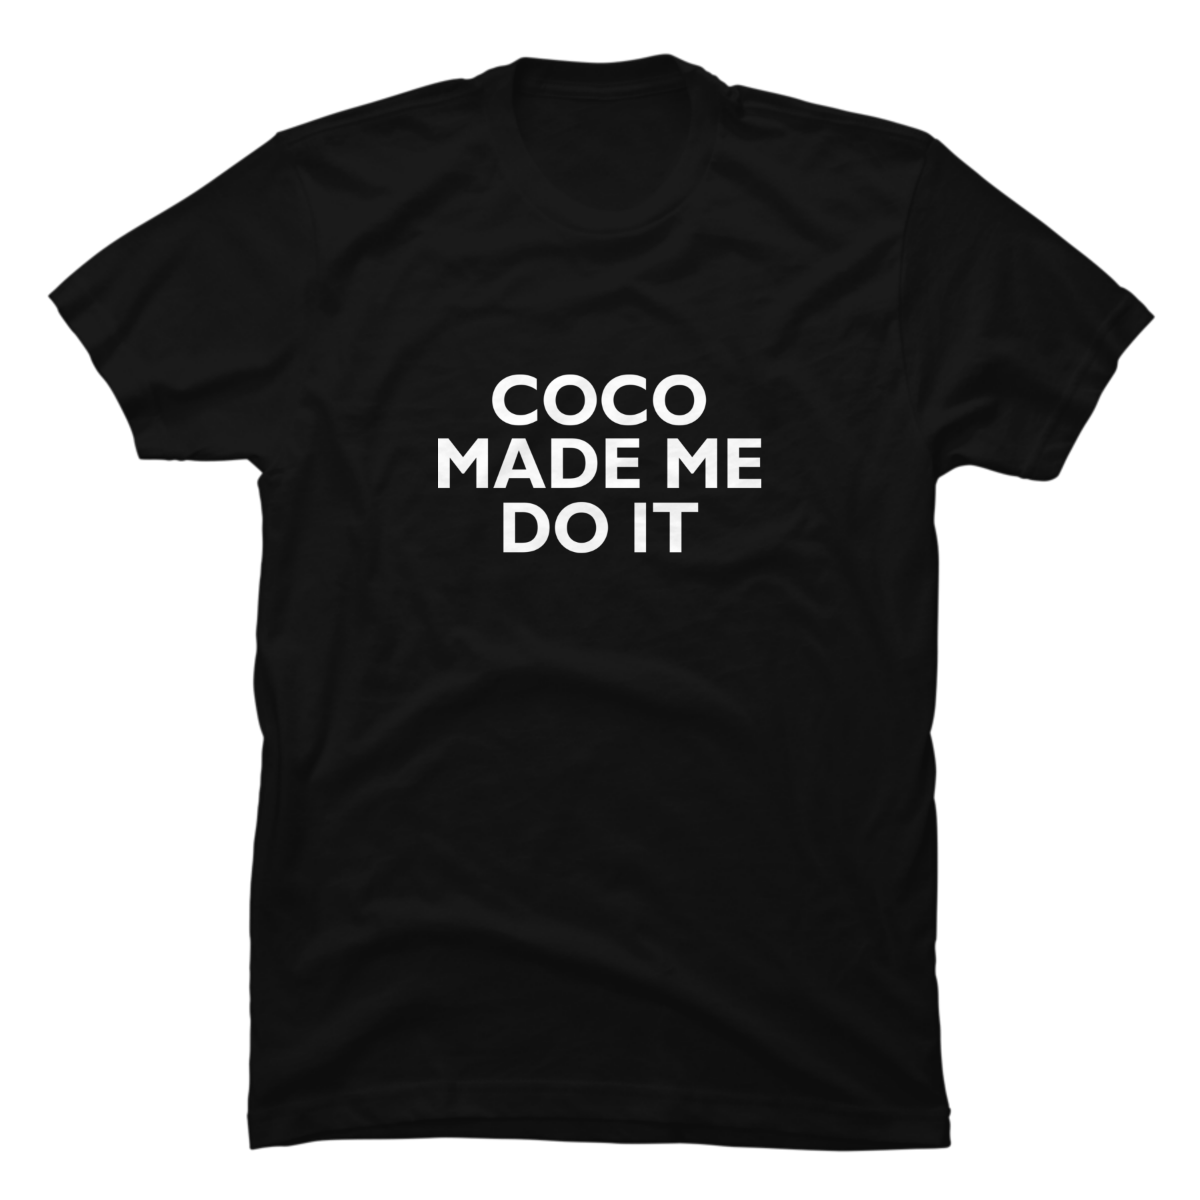 coco made me do it t shirt